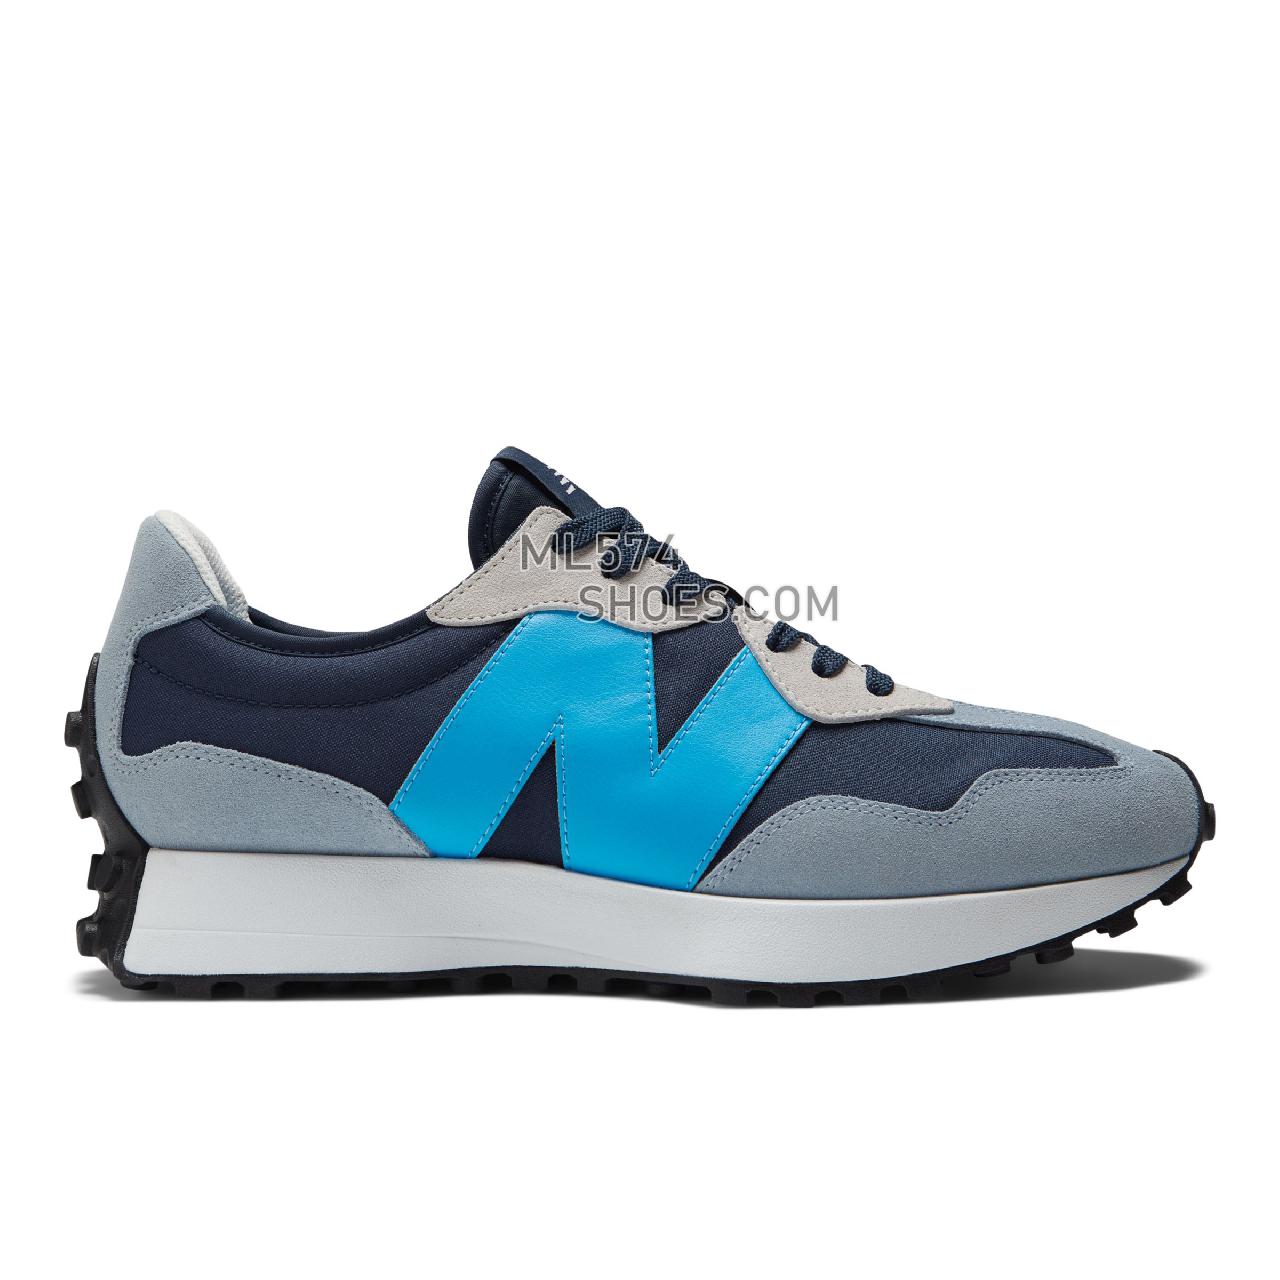 New Balance 327 - Men's Classic Sneakers - Natural Indigo with Vibrant Sky - MS327BF